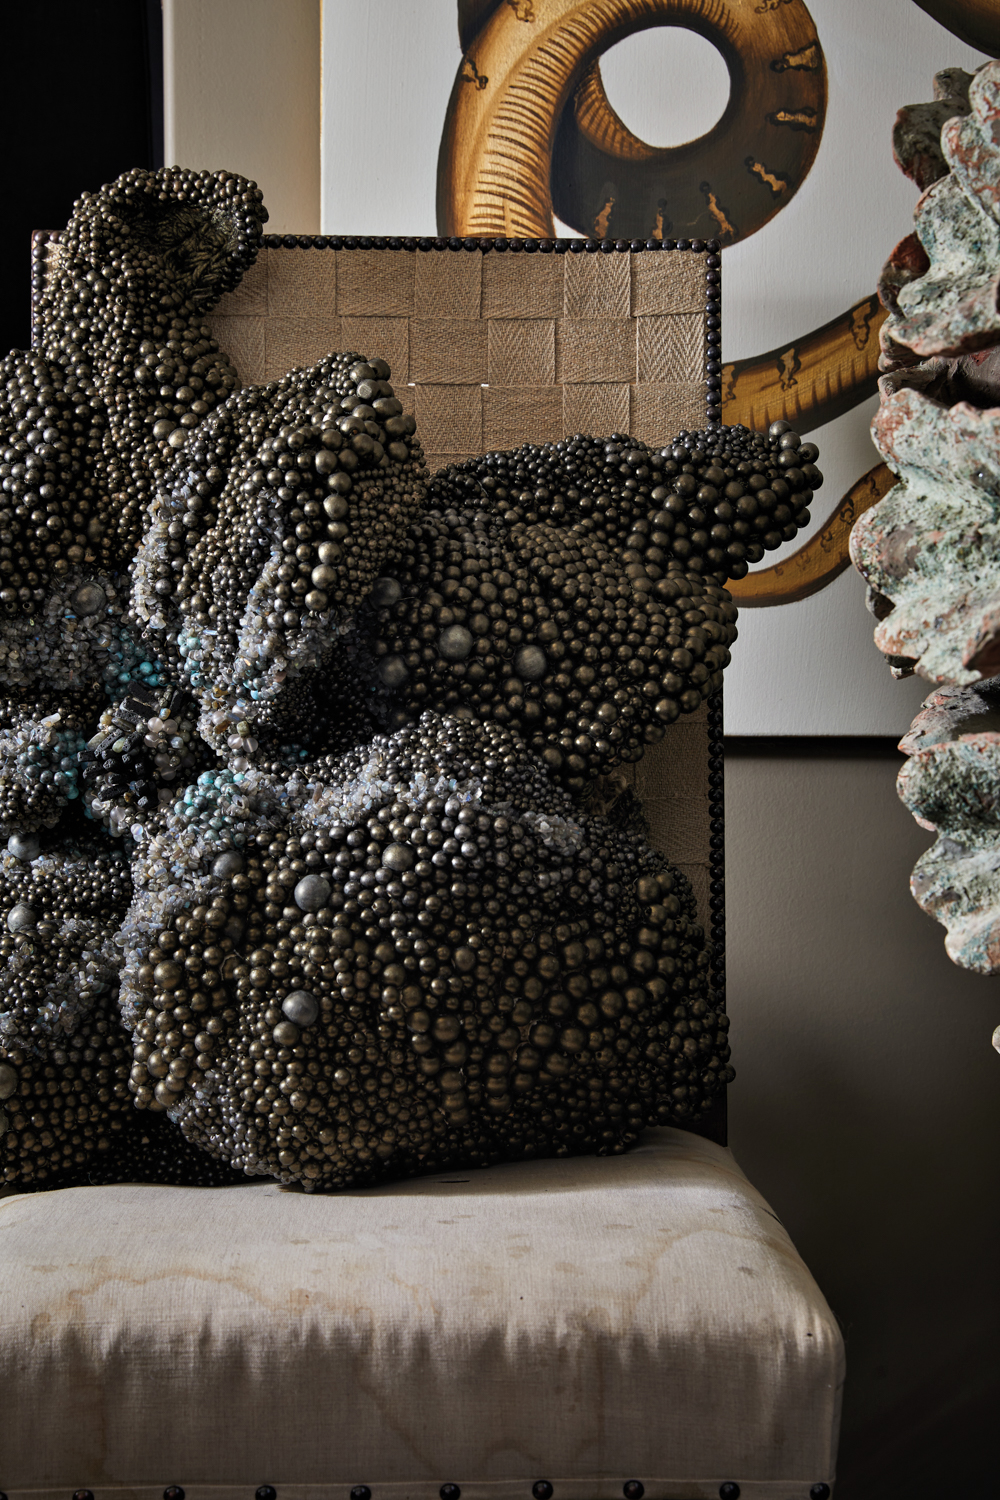 Graphite-colored sculpture with vague references to the starfish form sitting in a chair